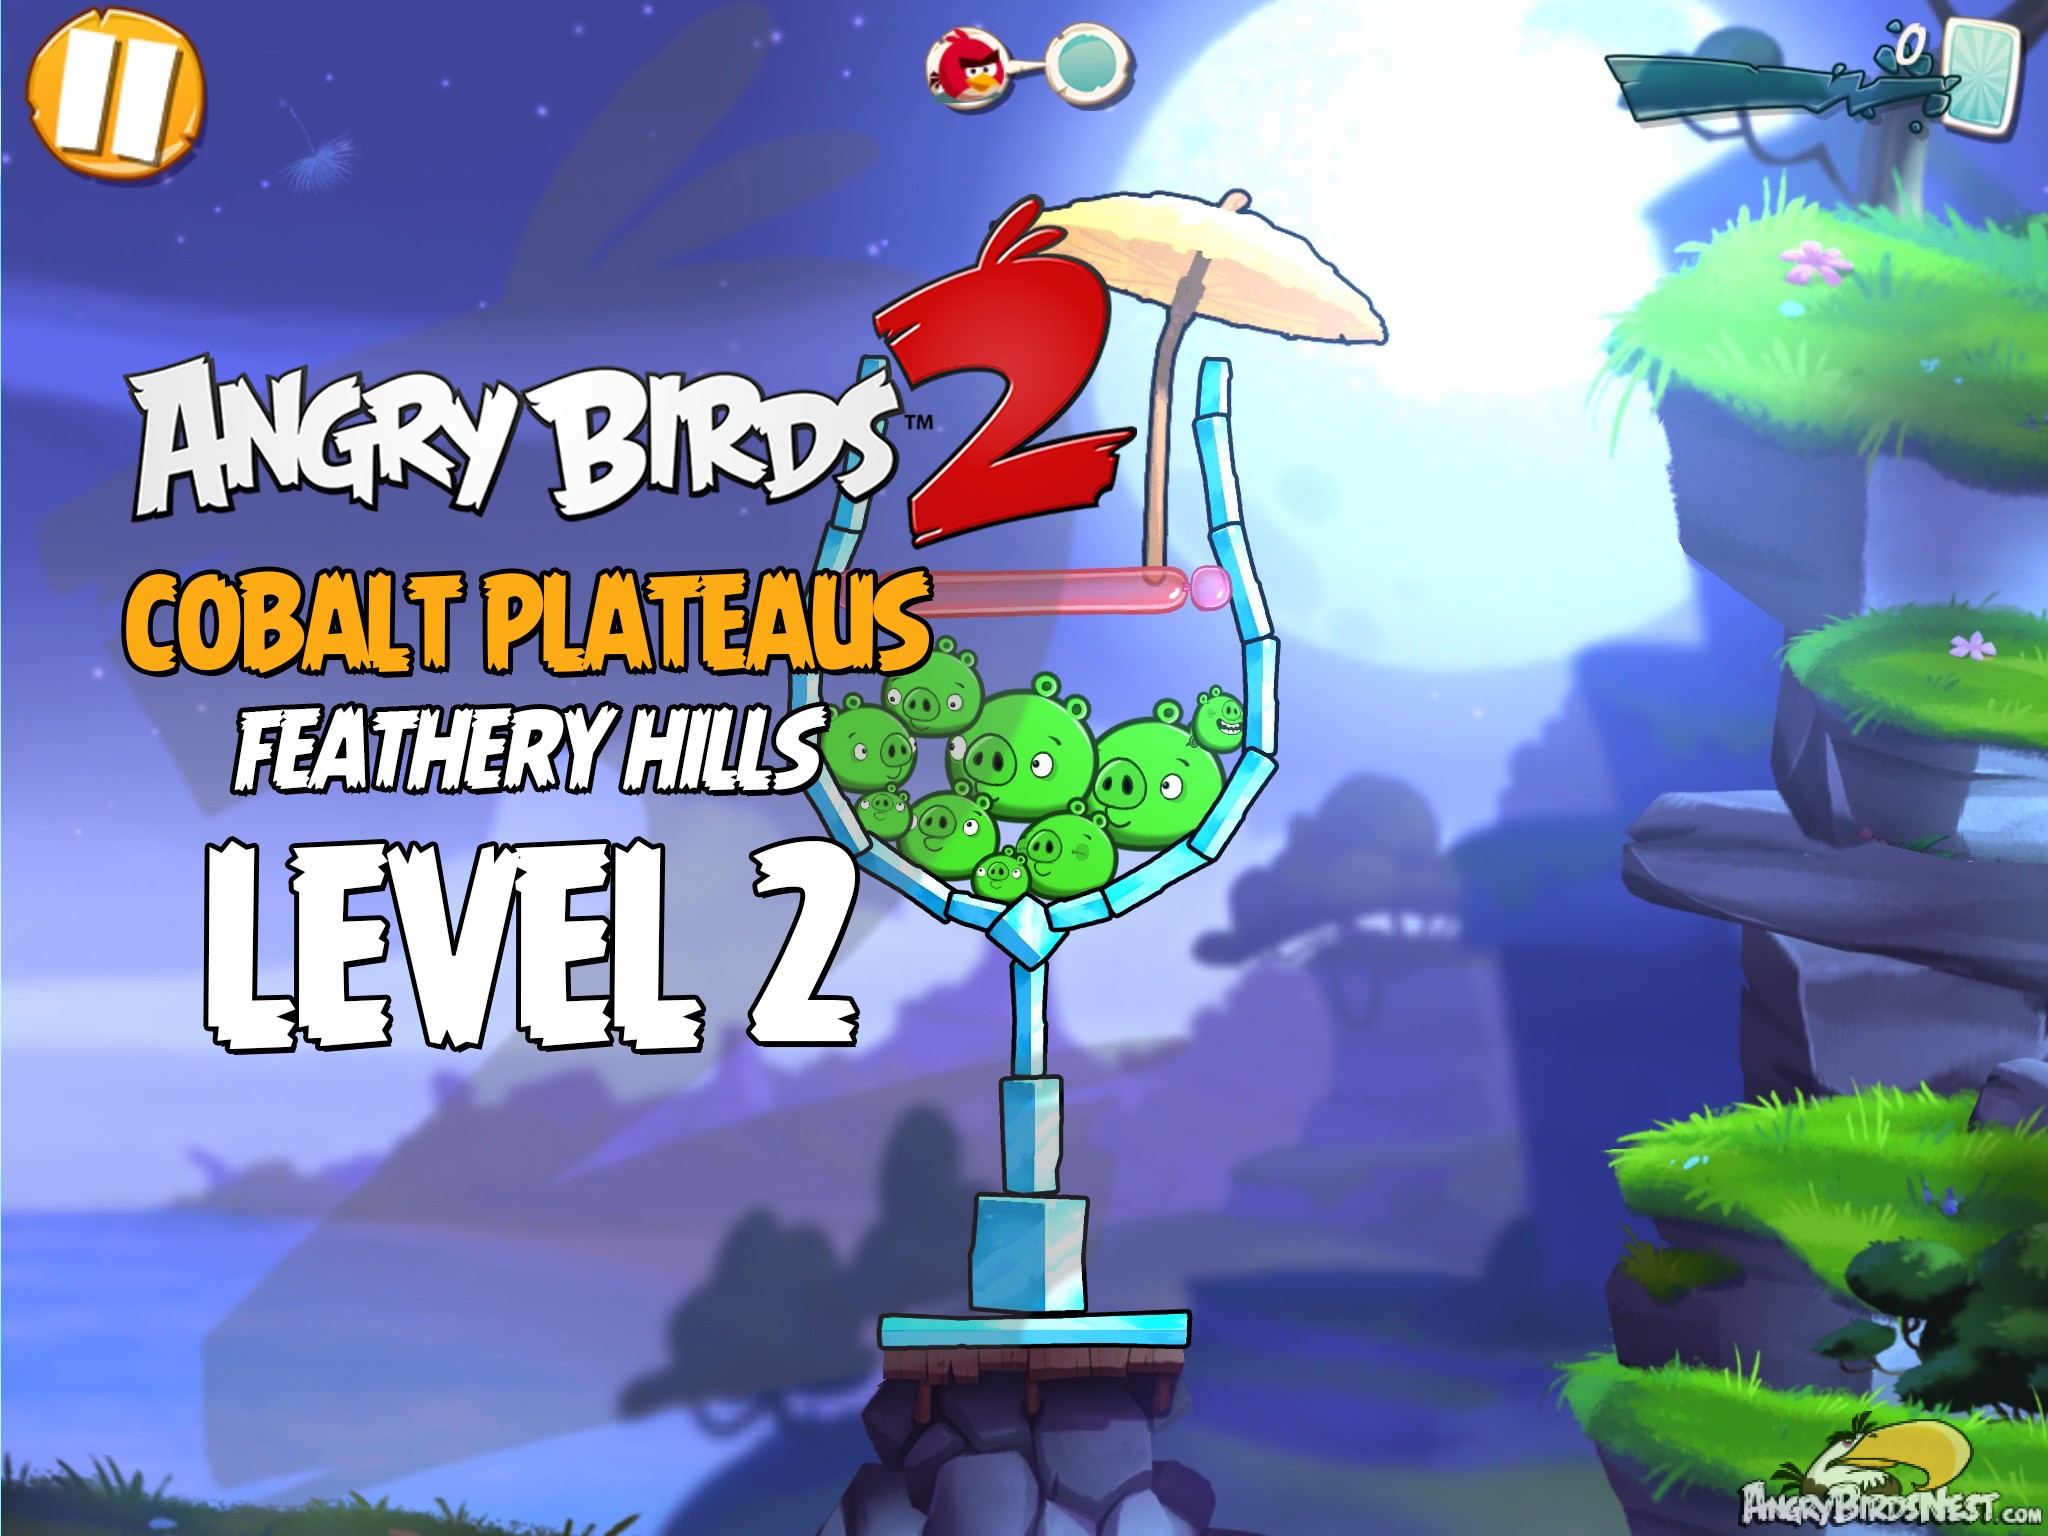 Angry Birds 2 Cobalt Plateaus Feathery Hills Level 2